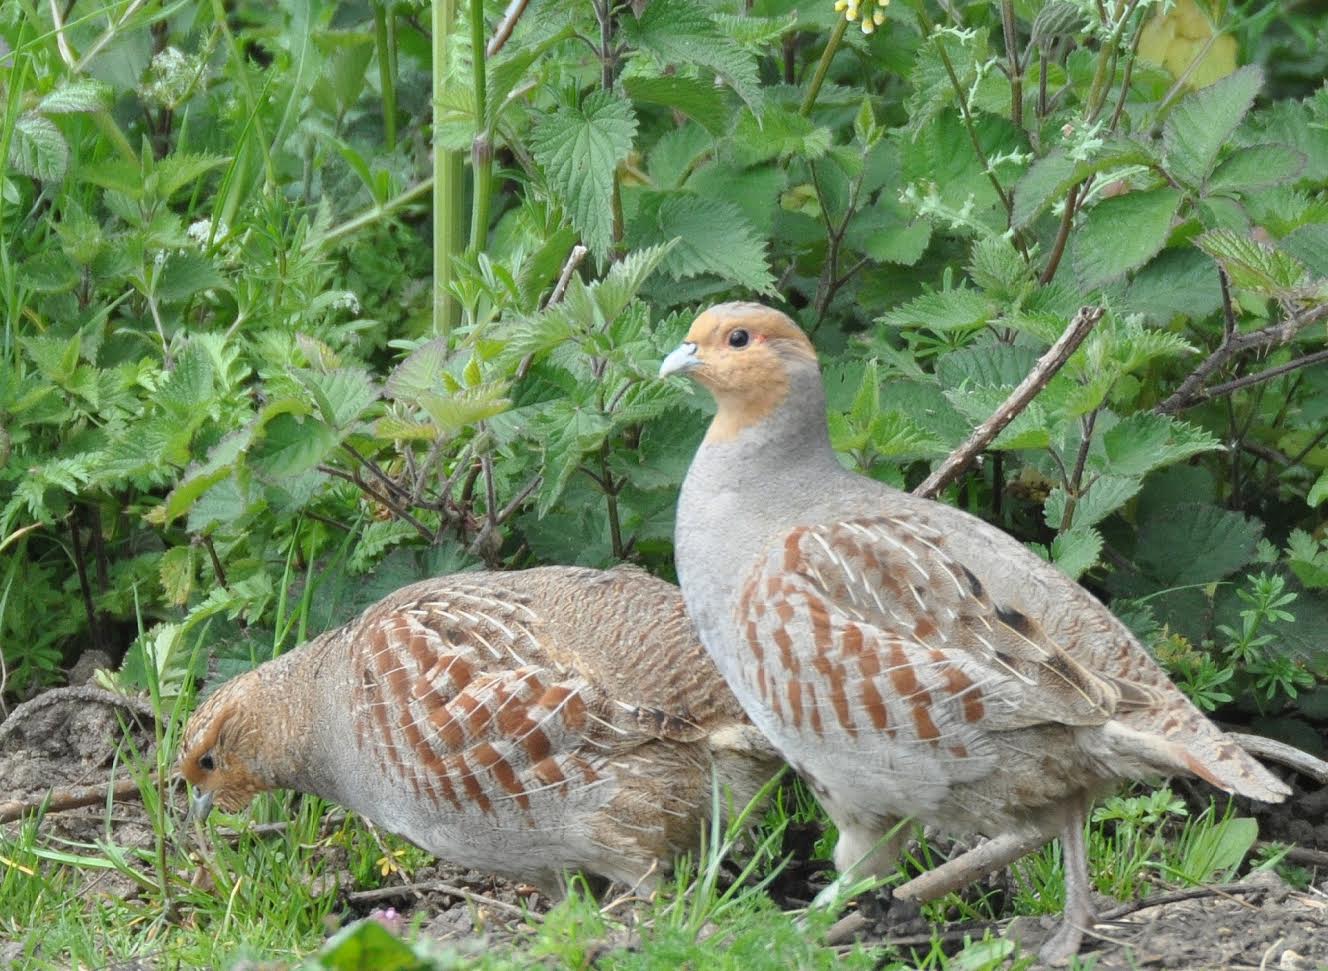 In some parts of England, wild grey partridge production appears to have been low